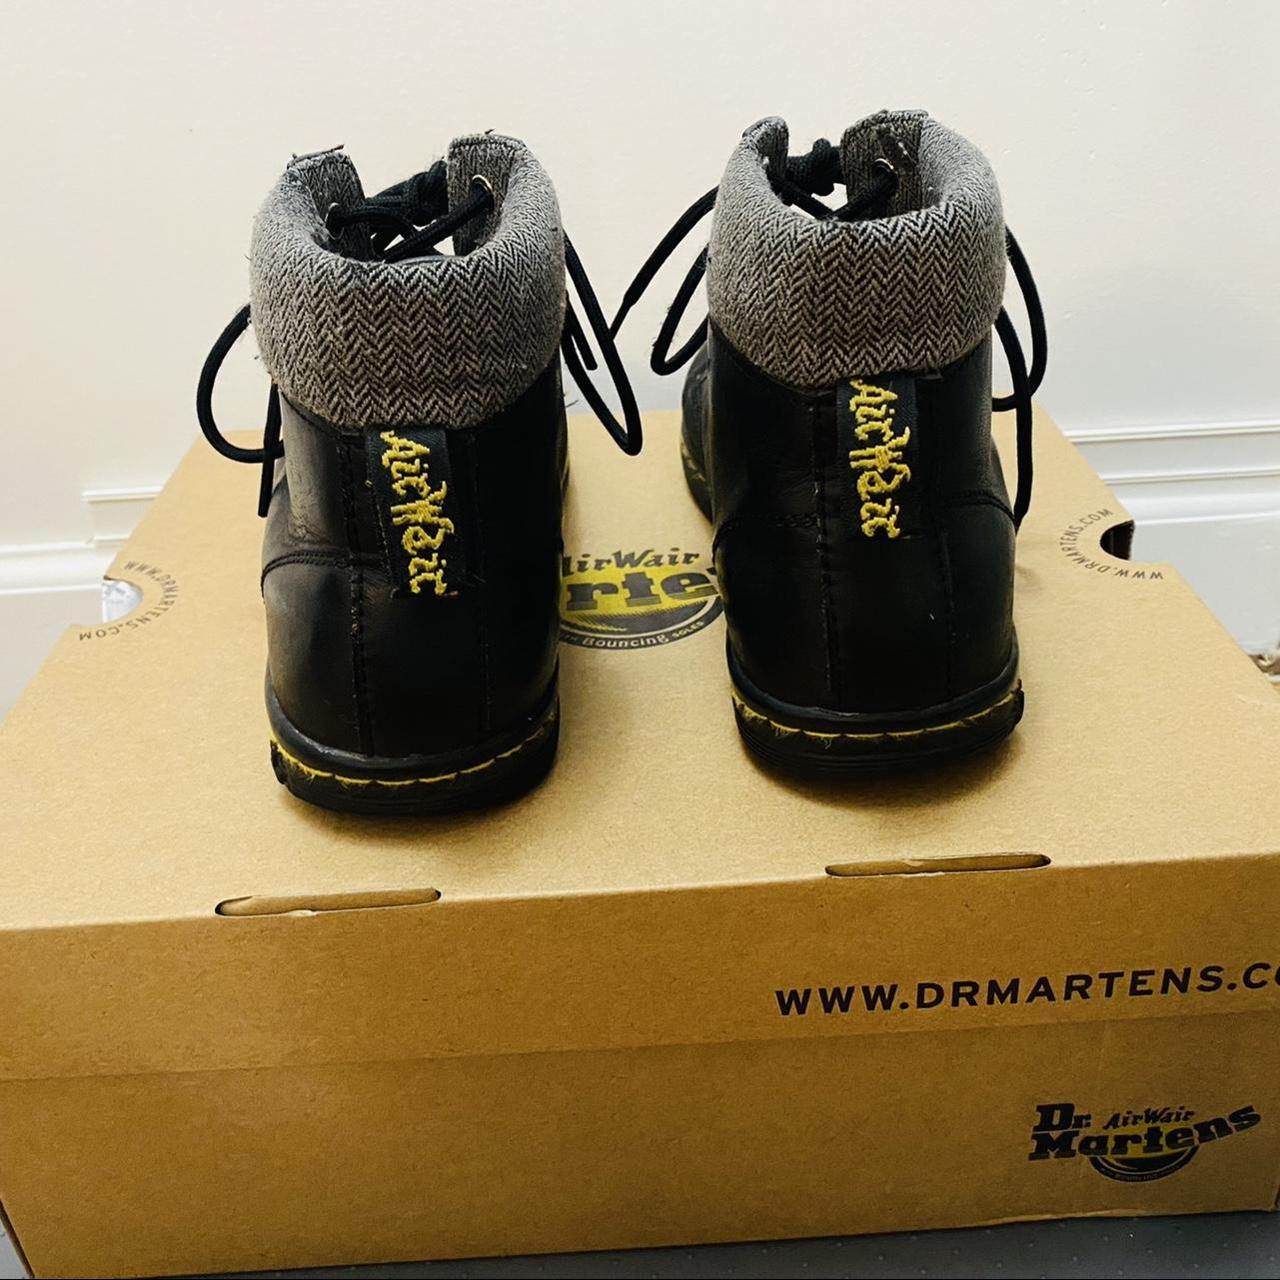 Dr. Martens Women's Black and Grey Boots (3)